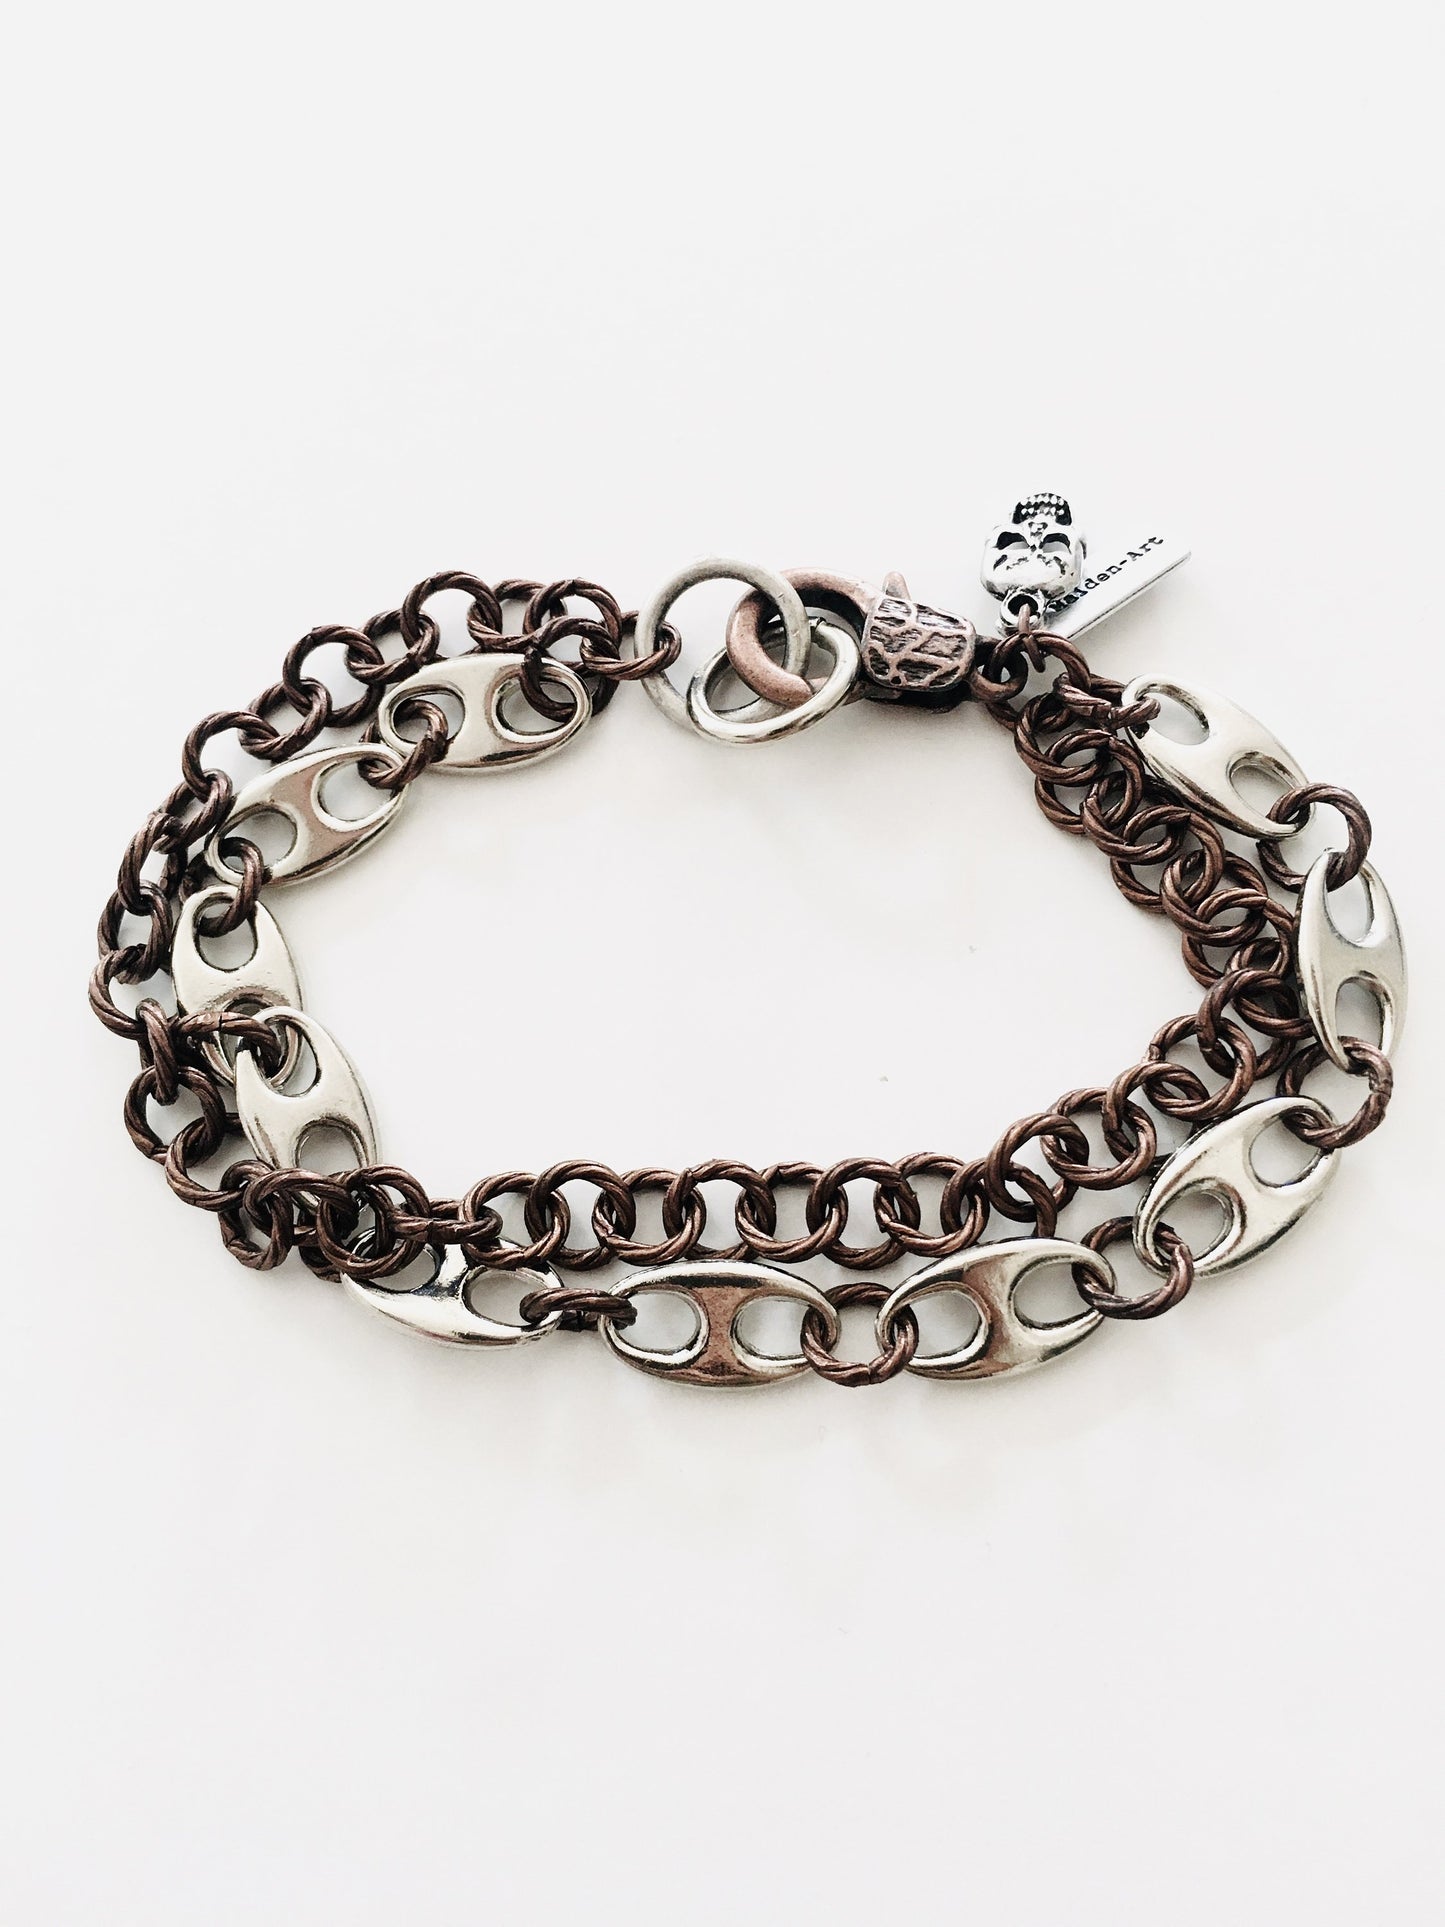 Silver and Copper Marine Link Chain Mens Bracelet, made in Italy, in 2